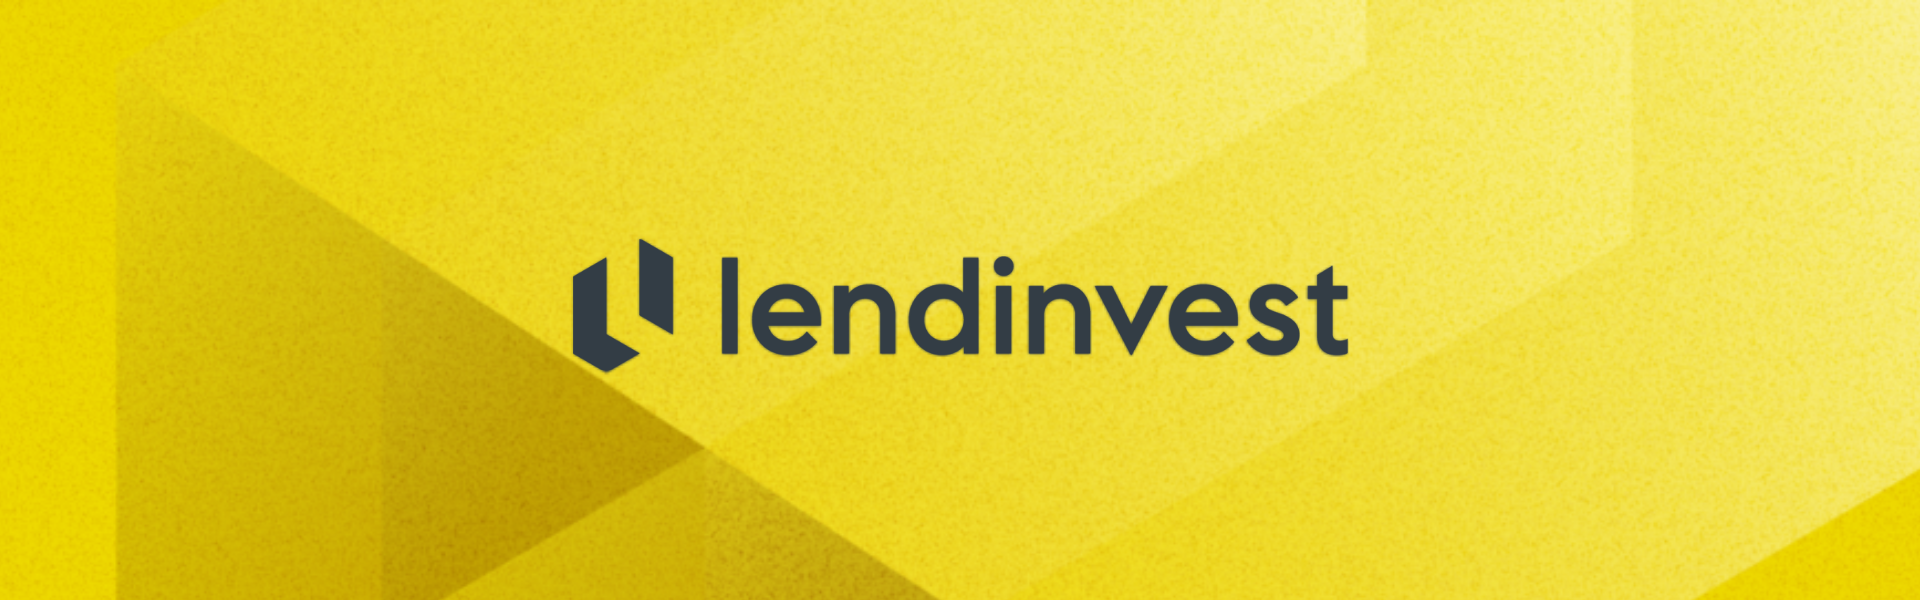 Lendinvest Logo with yellow background